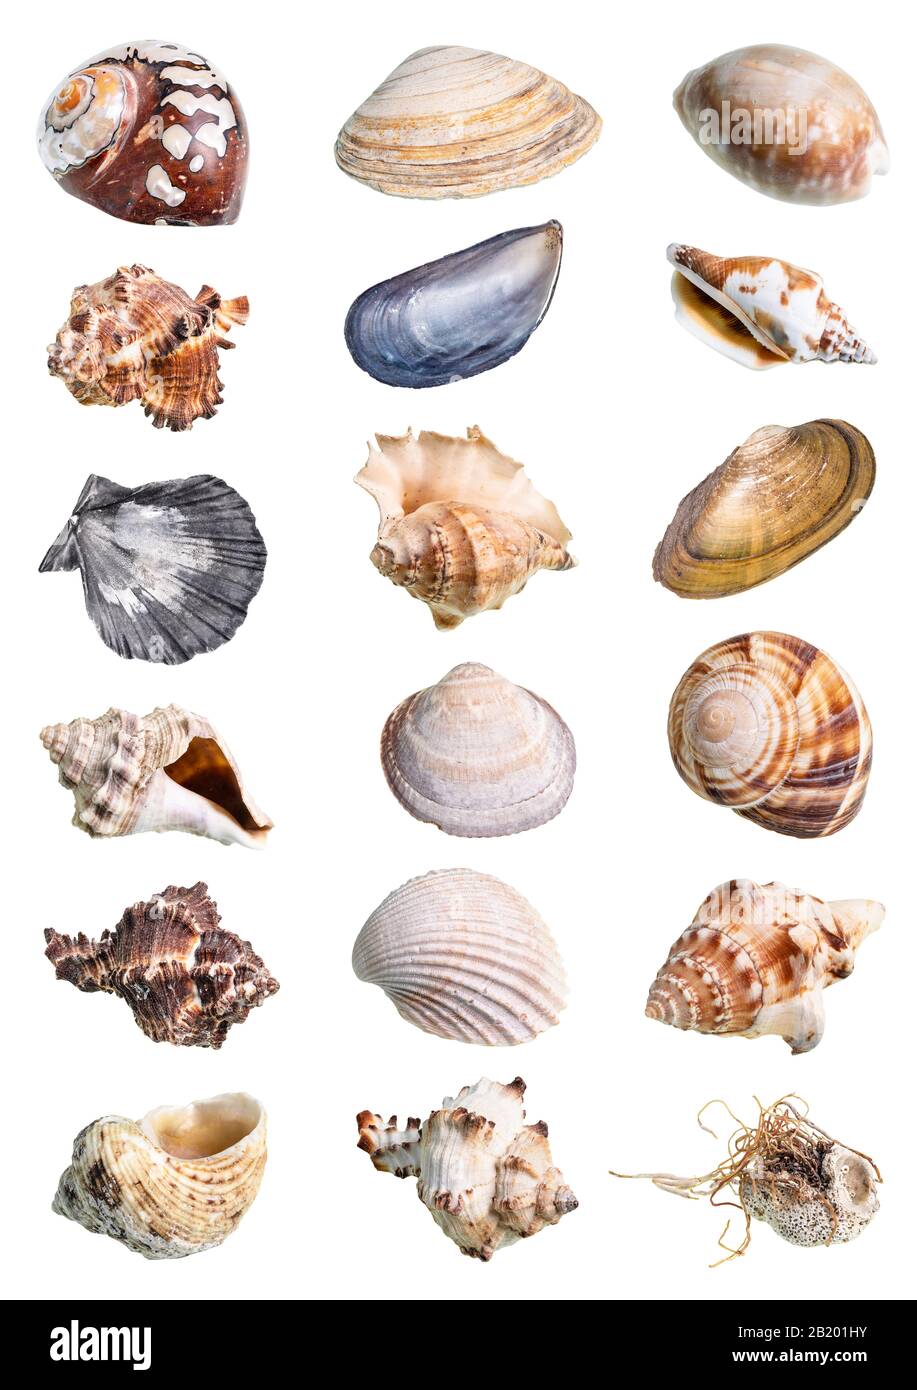 various shells of mollusks cutout on white background Stock Photo